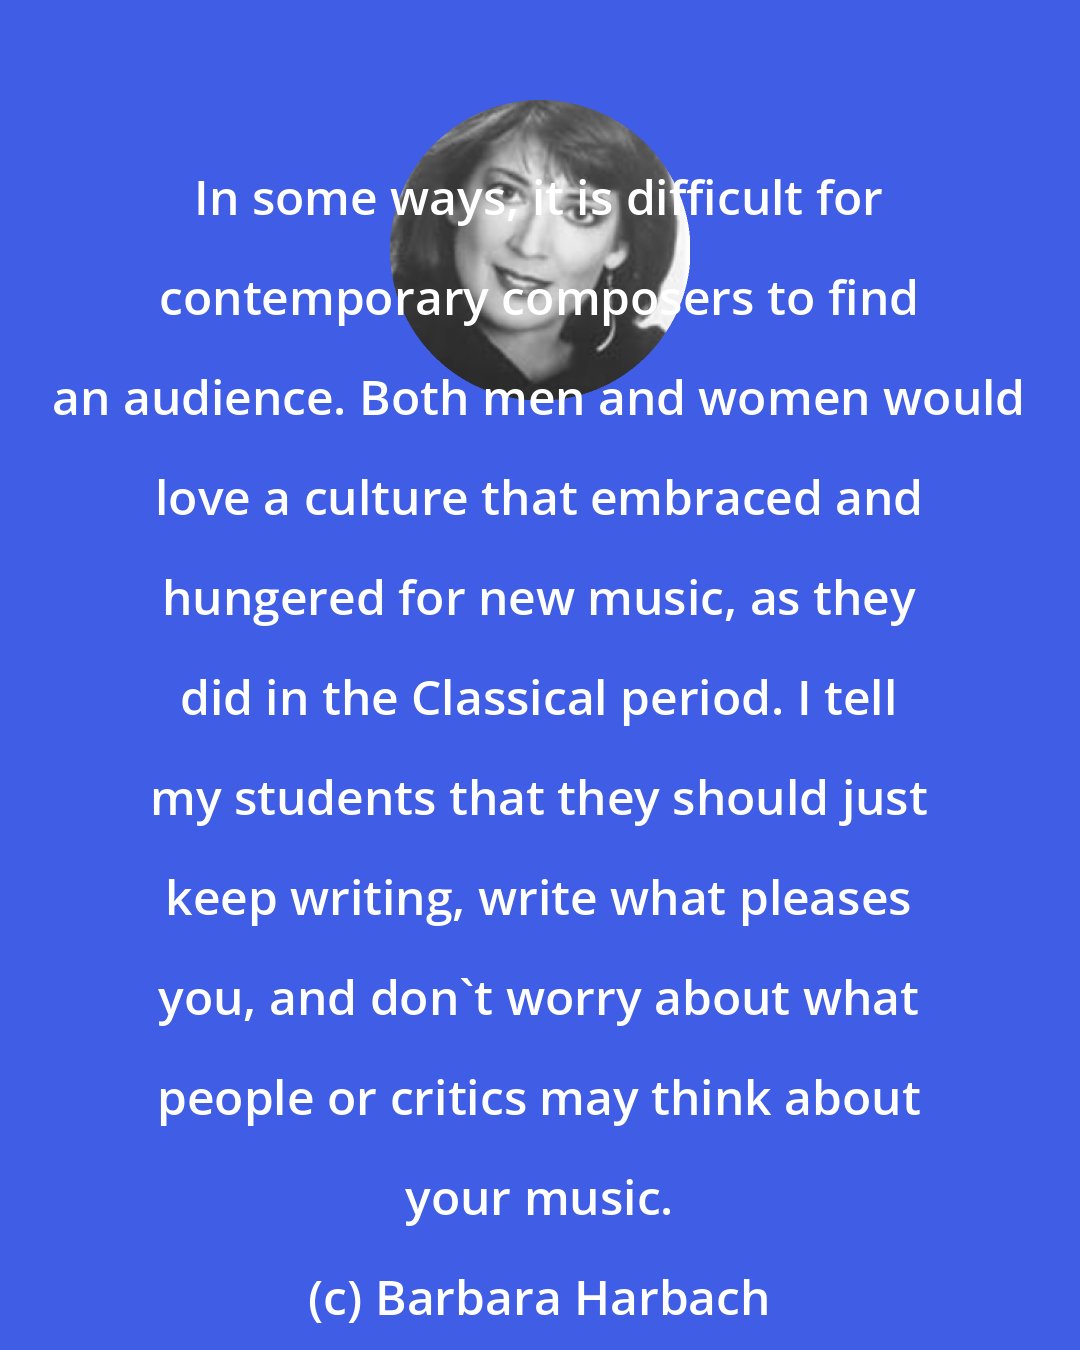 Barbara Harbach: In some ways, it is difficult for contemporary composers to find an audience. Both men and women would love a culture that embraced and hungered for new music, as they did in the Classical period. I tell my students that they should just keep writing, write what pleases you, and don't worry about what people or critics may think about your music.